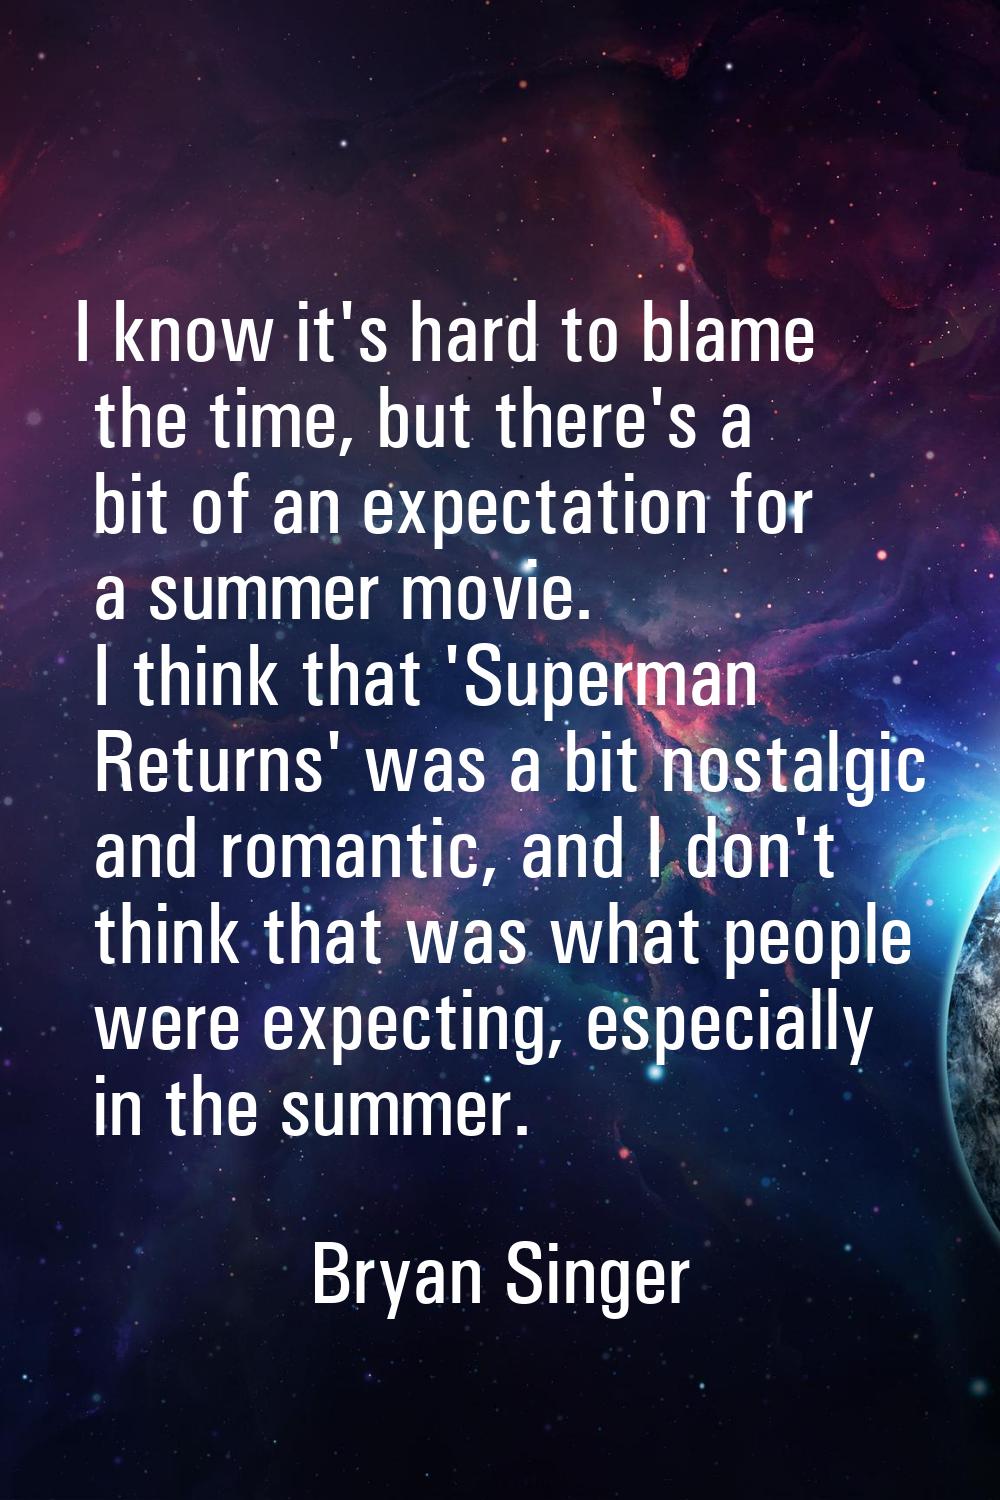 I know it's hard to blame the time, but there's a bit of an expectation for a summer movie. I think